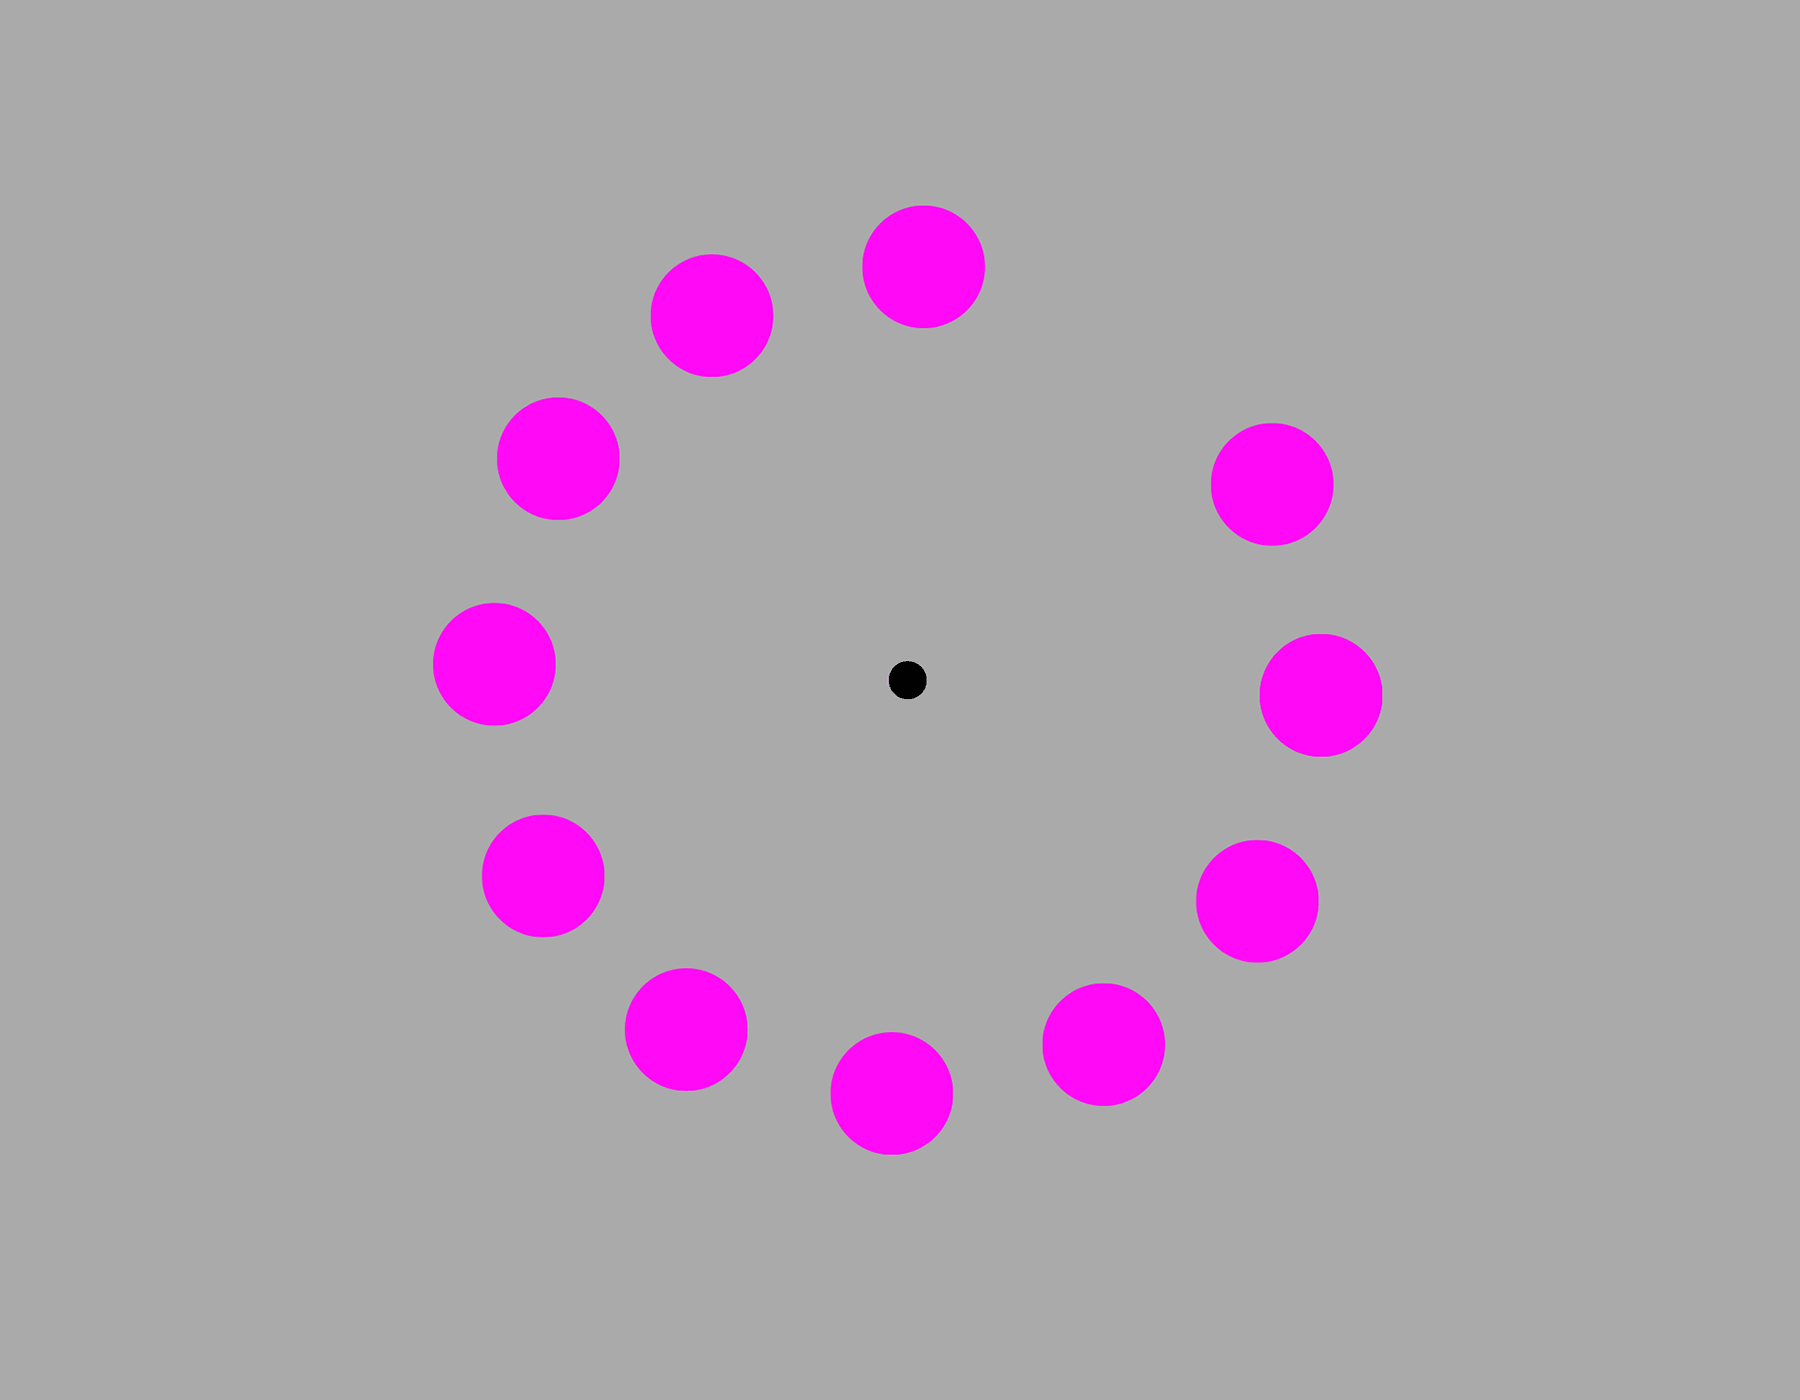 A circle of 12 evenly spaced dots, animated so that one dot disappears in a clockwise direction, leaving the illusion of a green dot. 